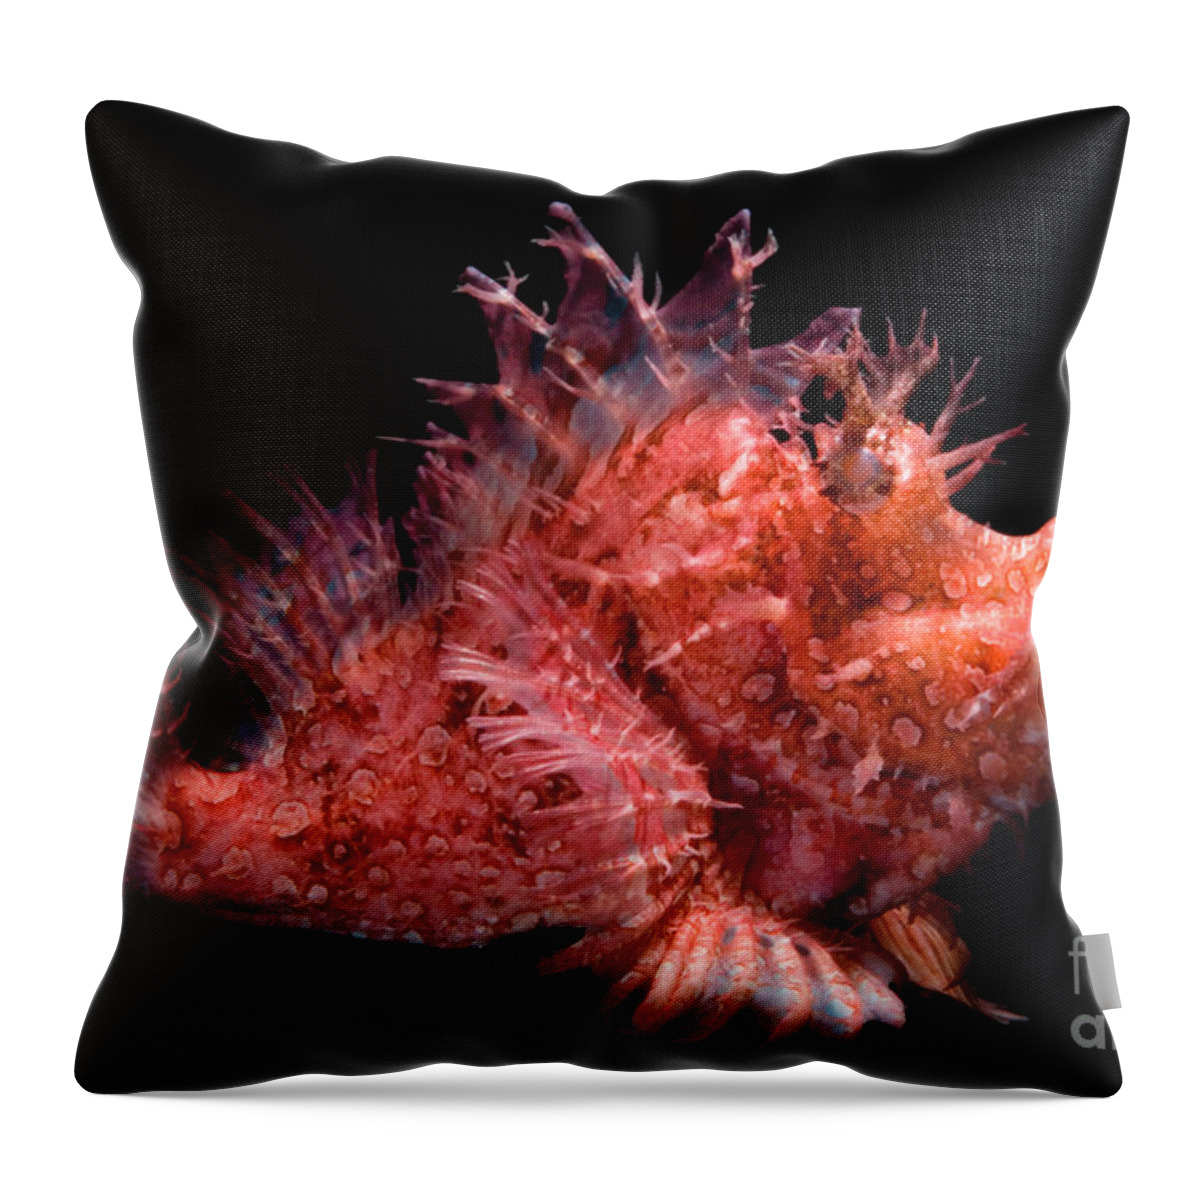 Weedy Throw Pillow featuring the photograph Weedy Scorpionfish by Dante Fenolio